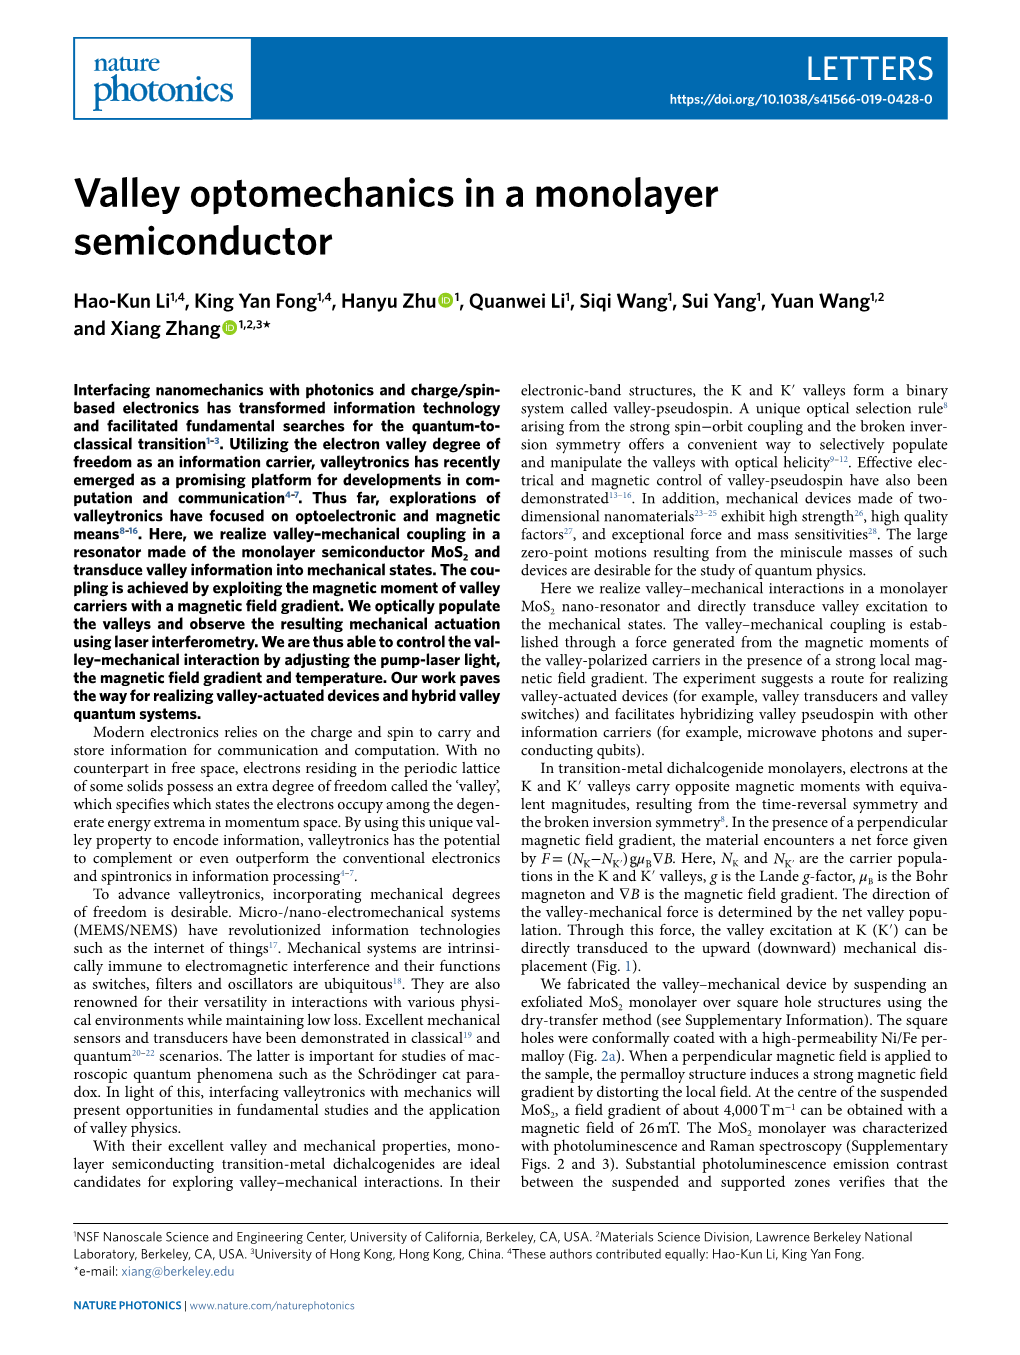 Valley Optomechanics in a Monolayer Semiconductor